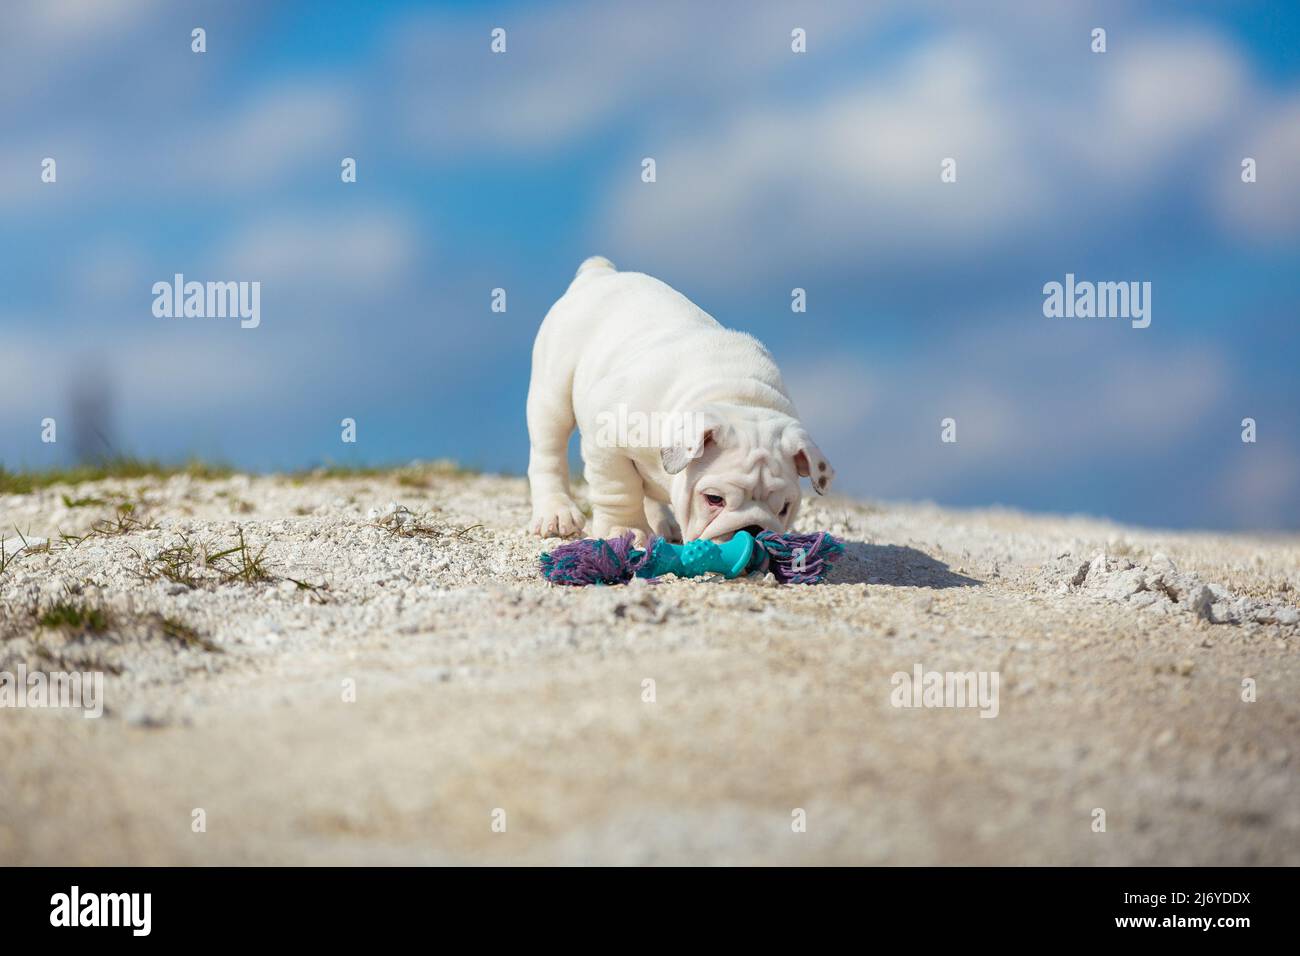 Little dog walking in nature against a bright blue sky Stock Photo